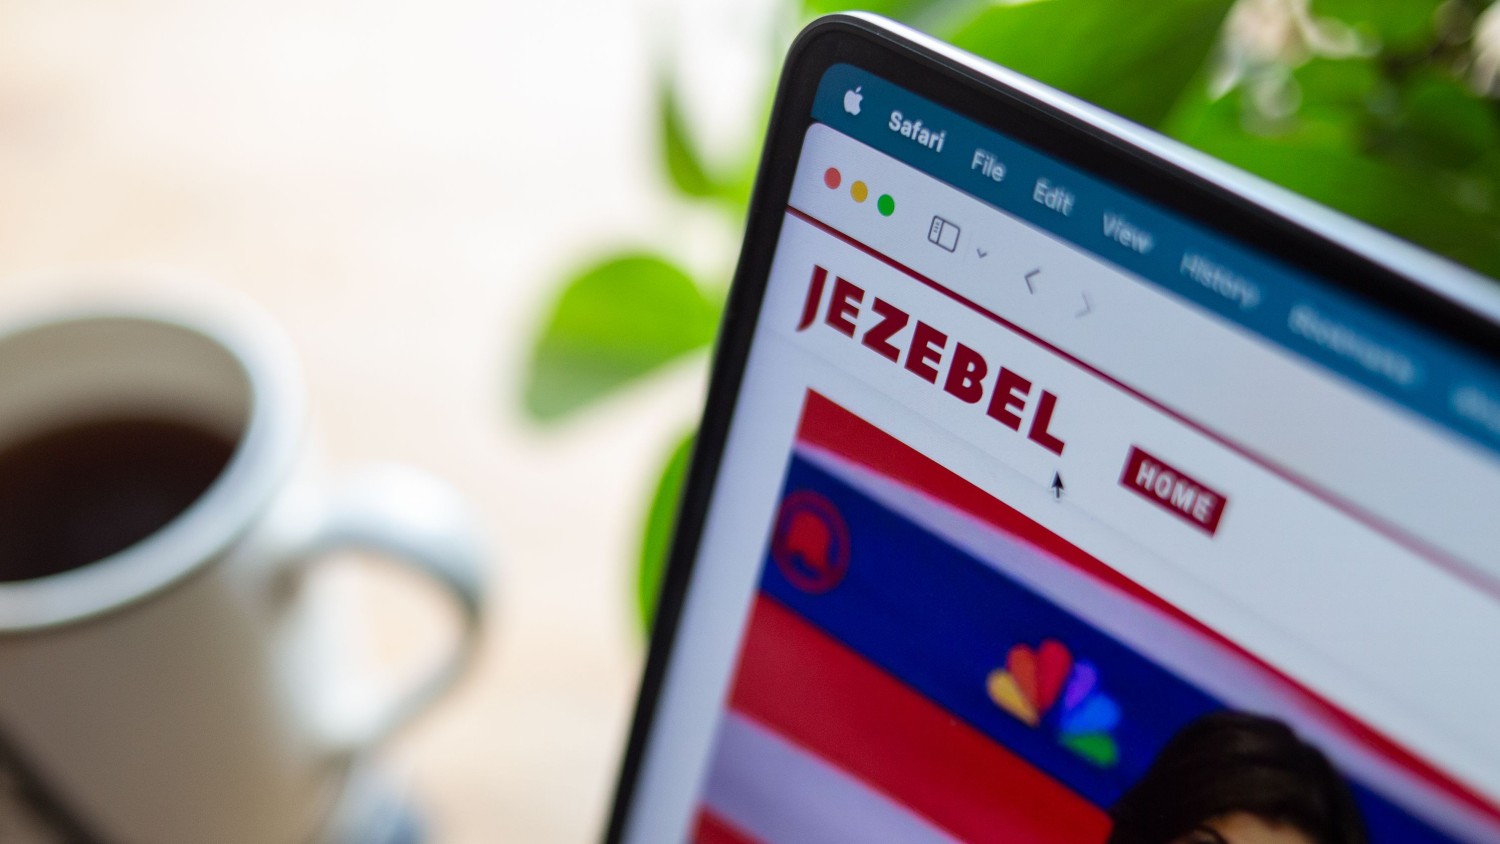 Jezebel shuts down, lays off staff in ‘excruciating’ decision, parent company says